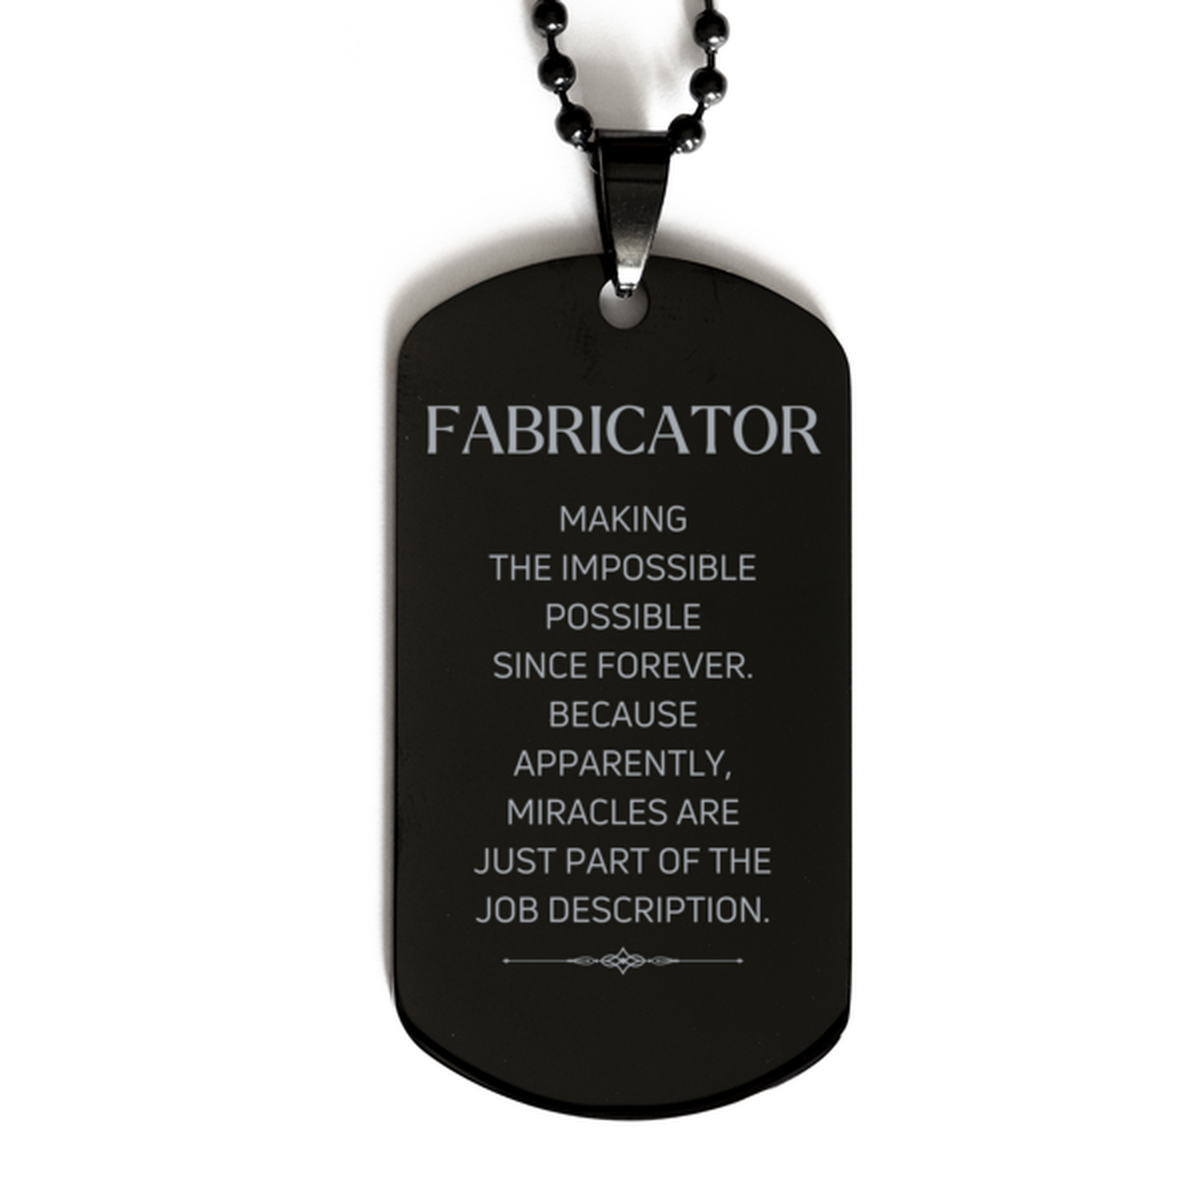 Funny Fabricator Gifts, Miracles are just part of the job description, Inspirational Birthday Black Dog Tag For Fabricator, Men, Women, Coworkers, Friends, Boss